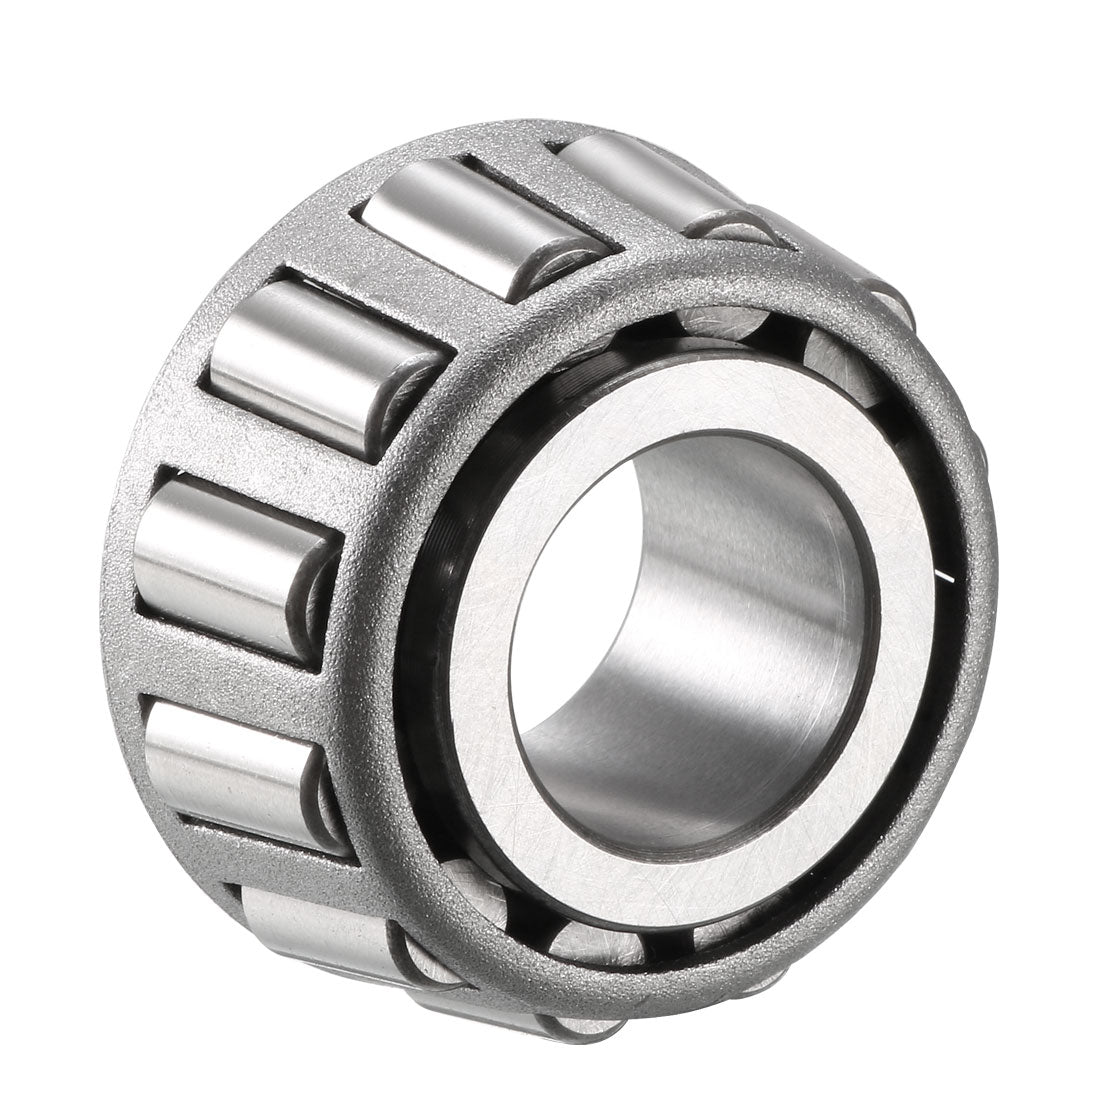 Uxcell Uxcell LM11949 Tapered Roller Bearing Single Cone 0.75" Bore 0.655" Width